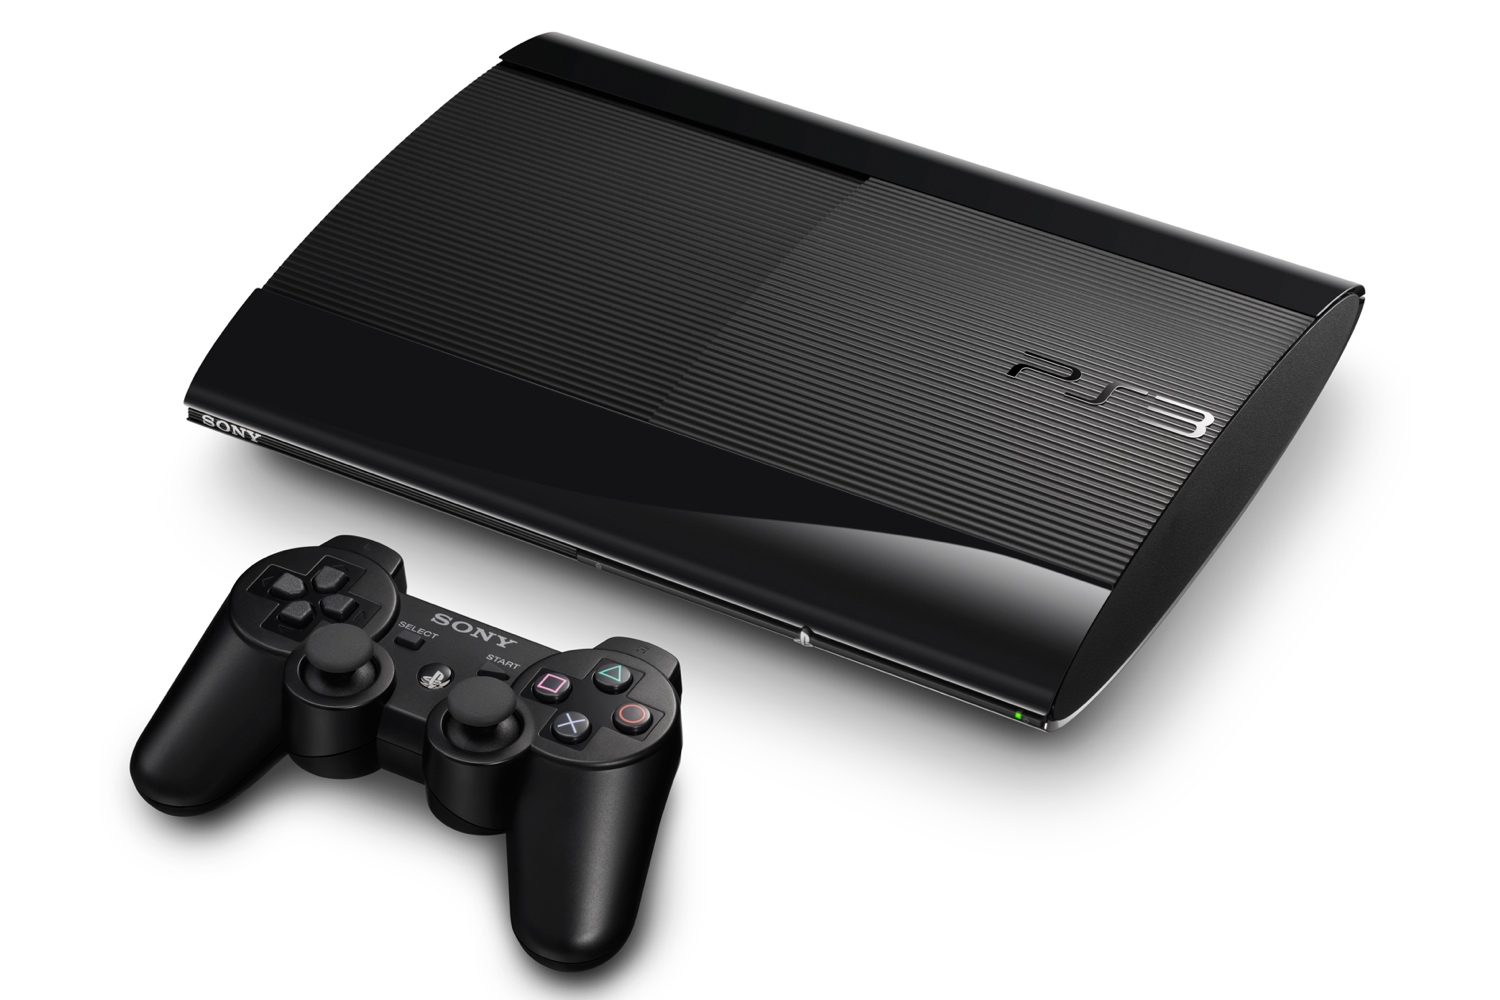 can the ps4 slim play ps3 games